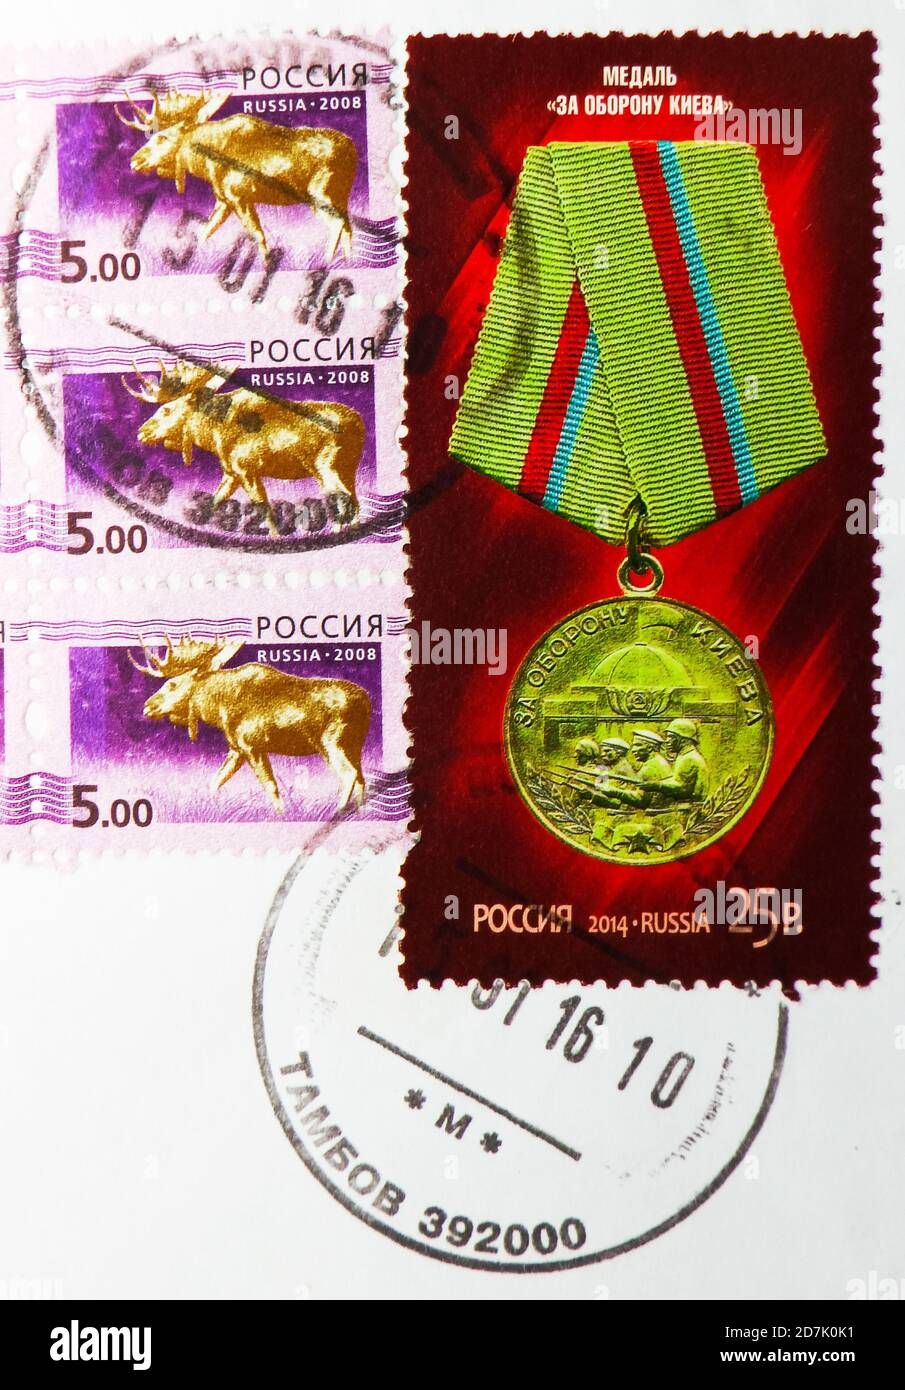 MOSCOW, RUSSIA - MARCH 11, 2020: Postage stamp printed in Russia with stamp of Tambov shows Medal 'For the Defence of Kiev', State awards of the Russi Stock Photo